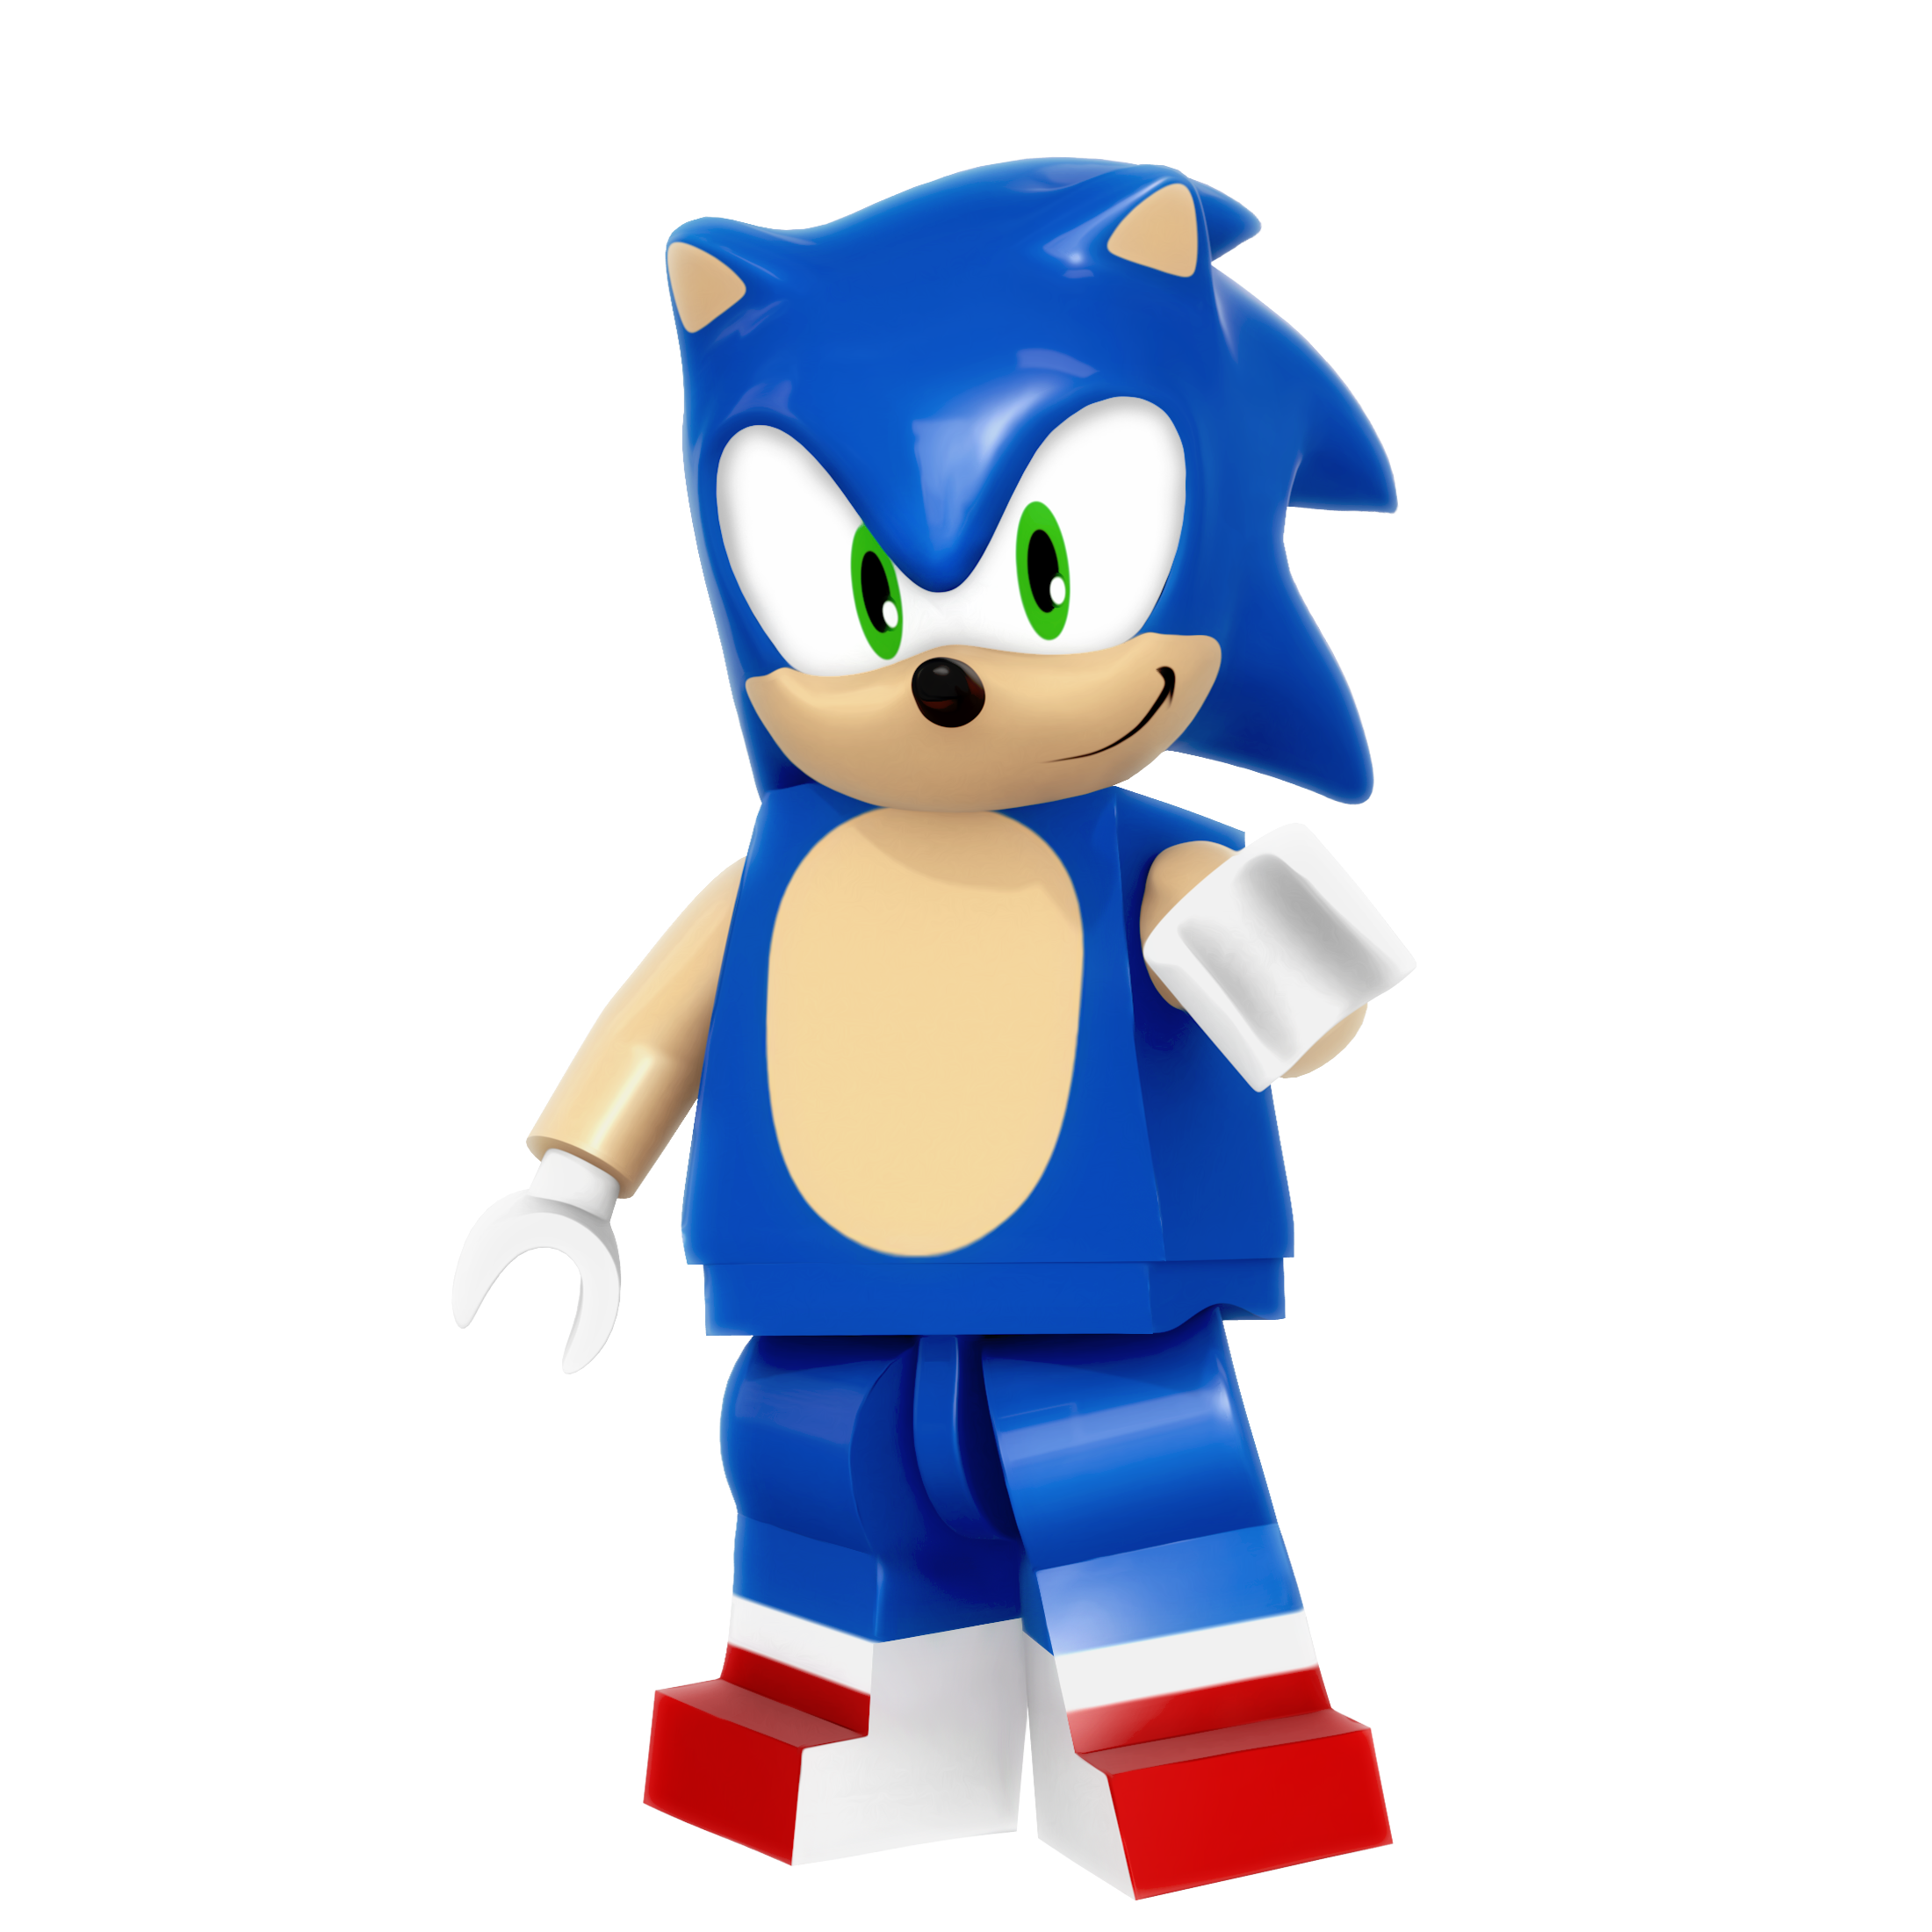 Uživatel Nibroc.Rock na Twitteru: „New Lego Sonic the Hedgehog Render! this model was ripped from Lego Dimensions by (Thanks again for the model!) https://t.co/c8PLEI1Amo“ / Twitter